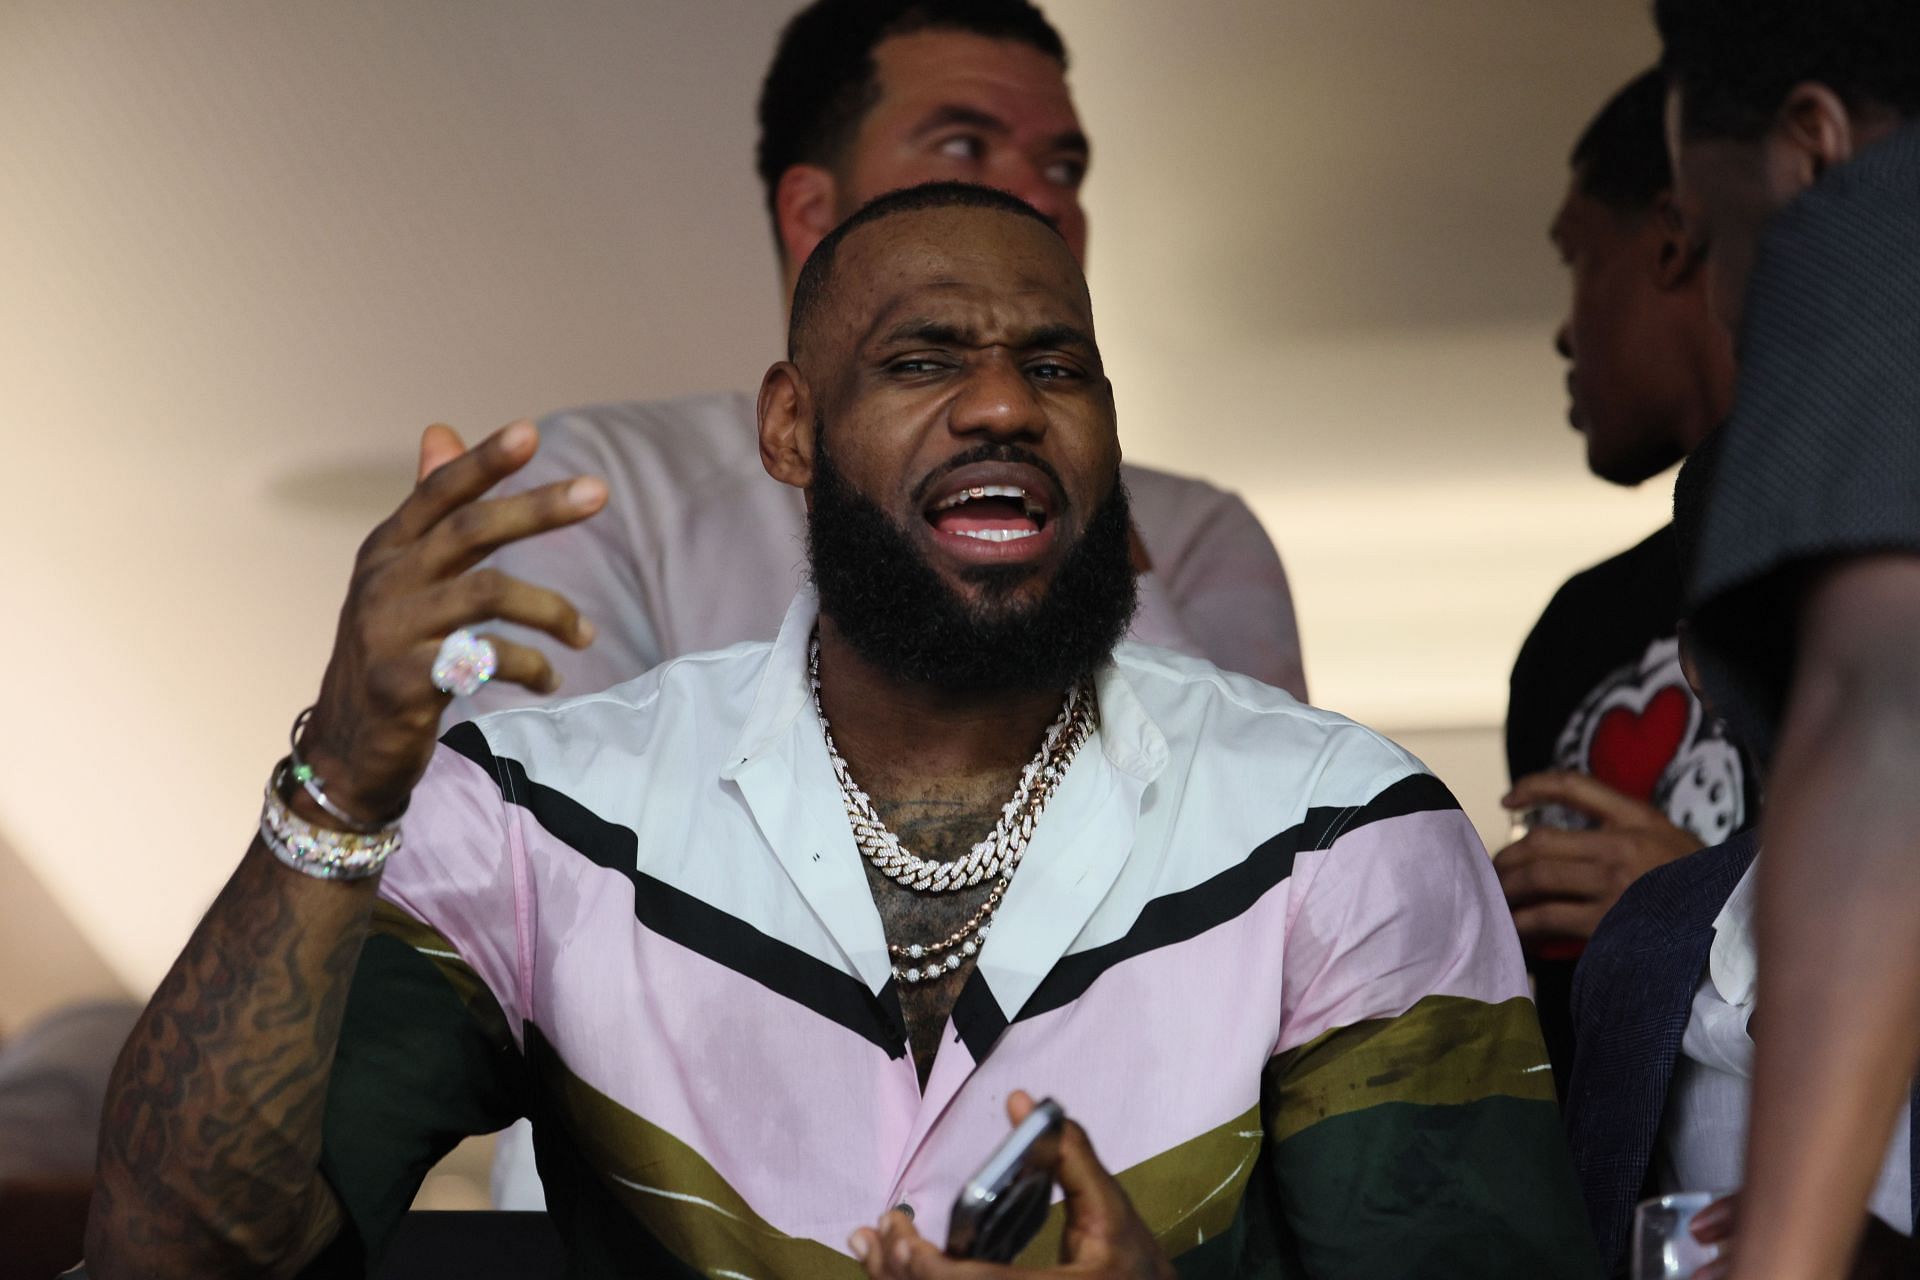 Watch: LeBron James’ ecstatic celebration as LA Rams’ Odell Beckham Jr. catches in the endzone for a touchdown during Super Bowl LVI